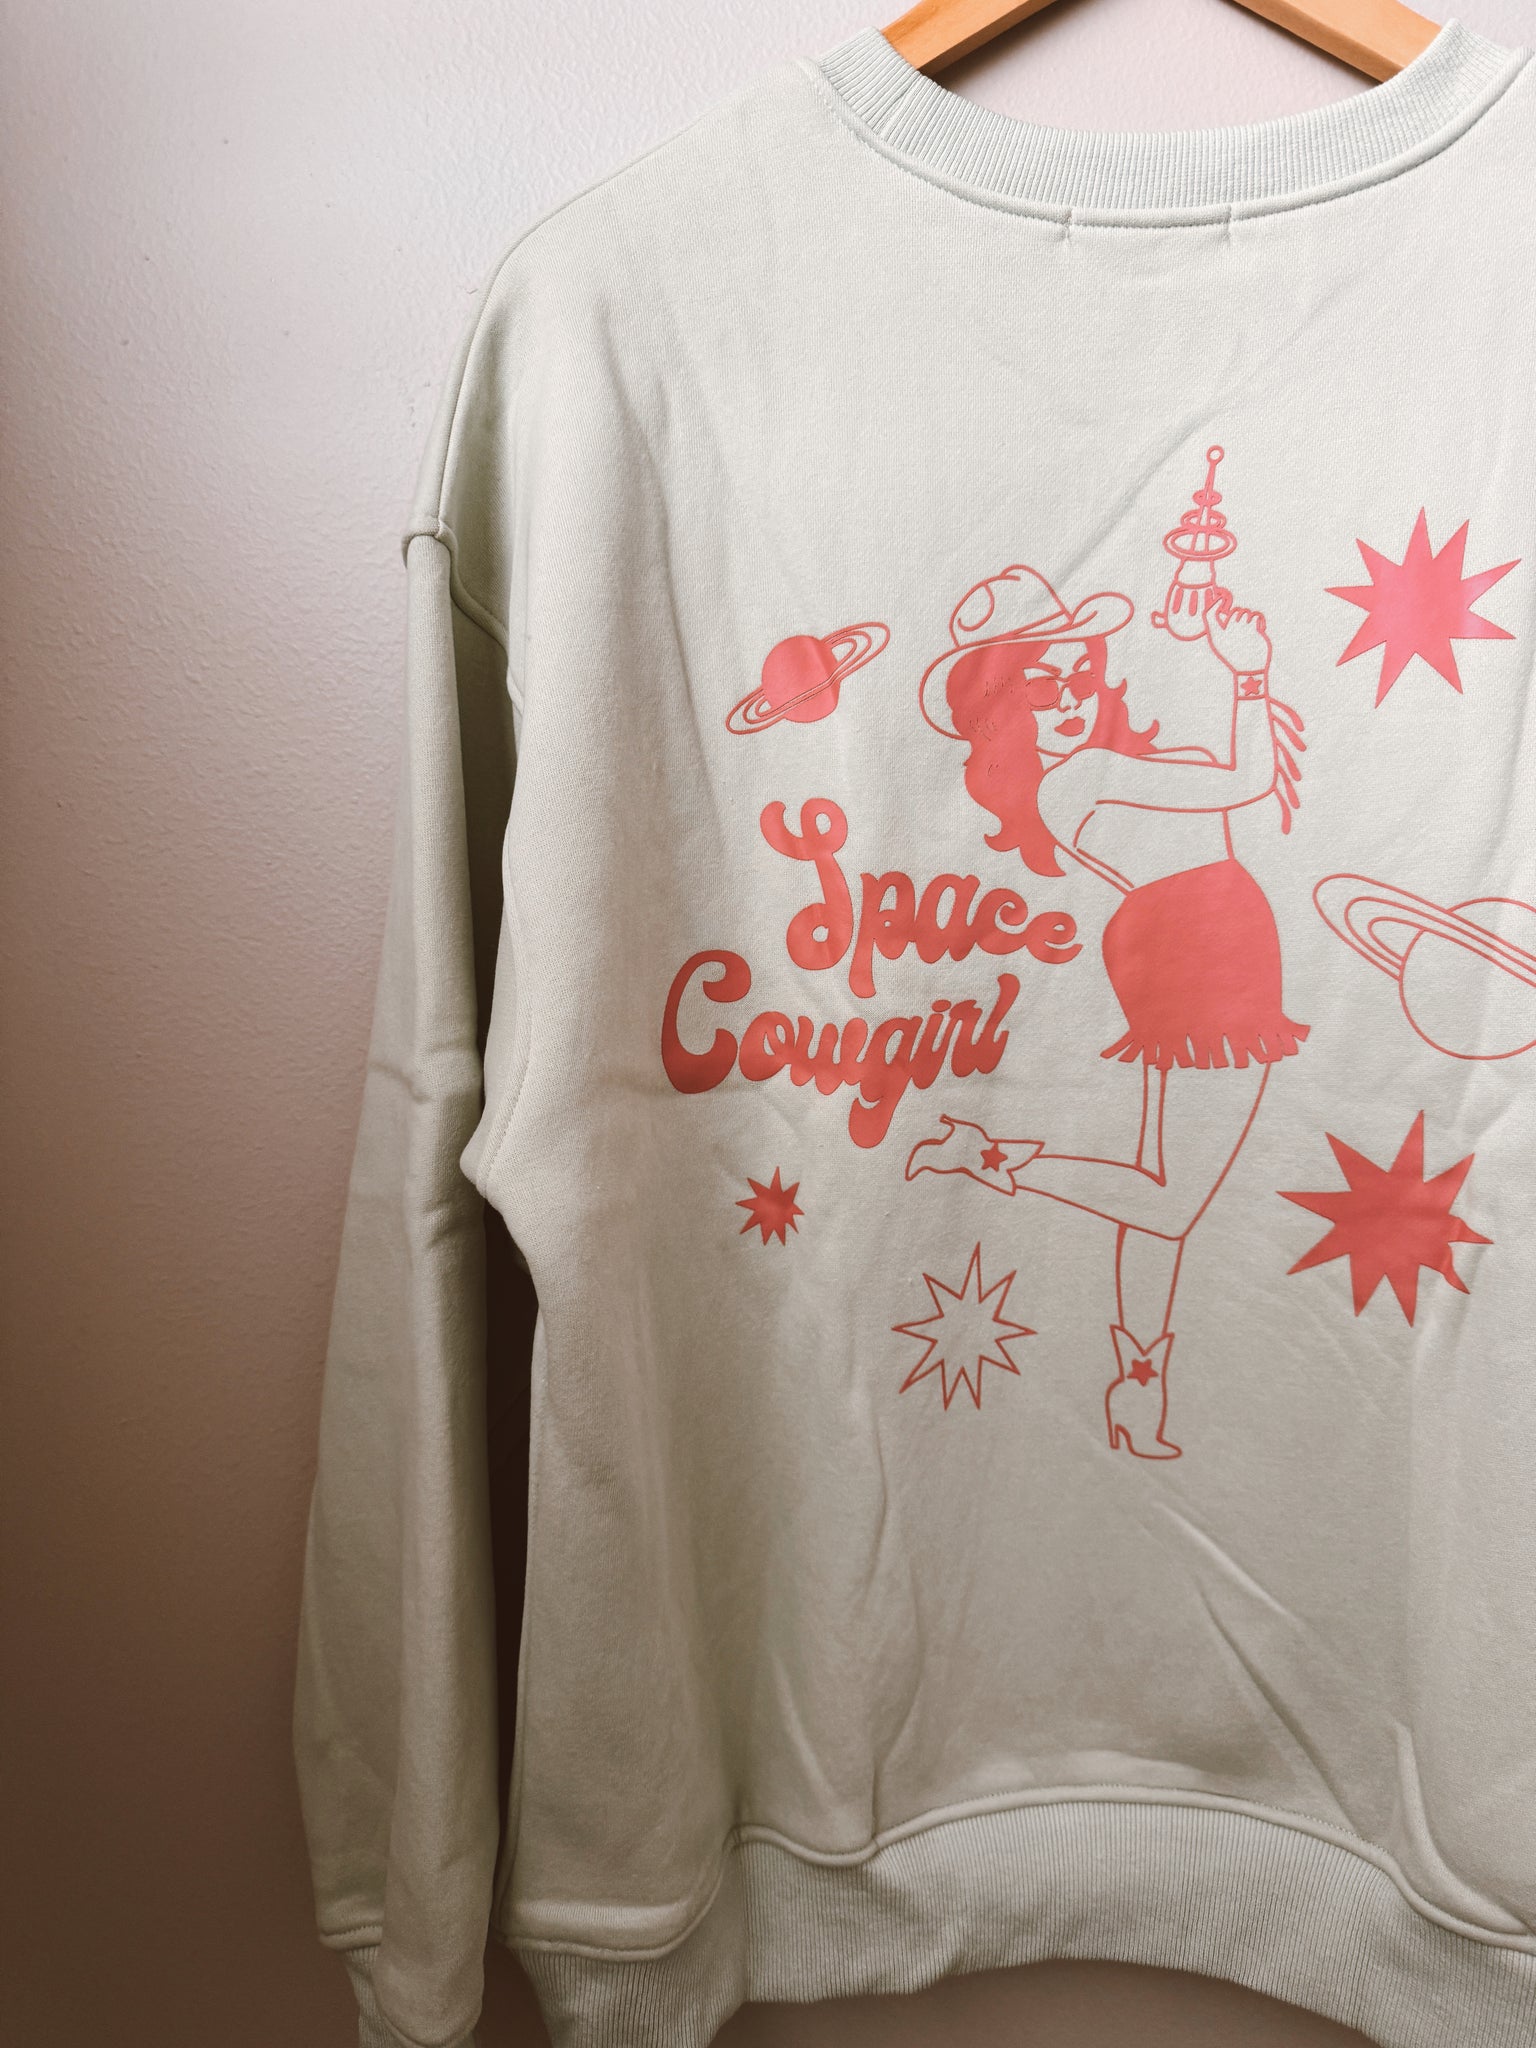 Space cowgirl sweater